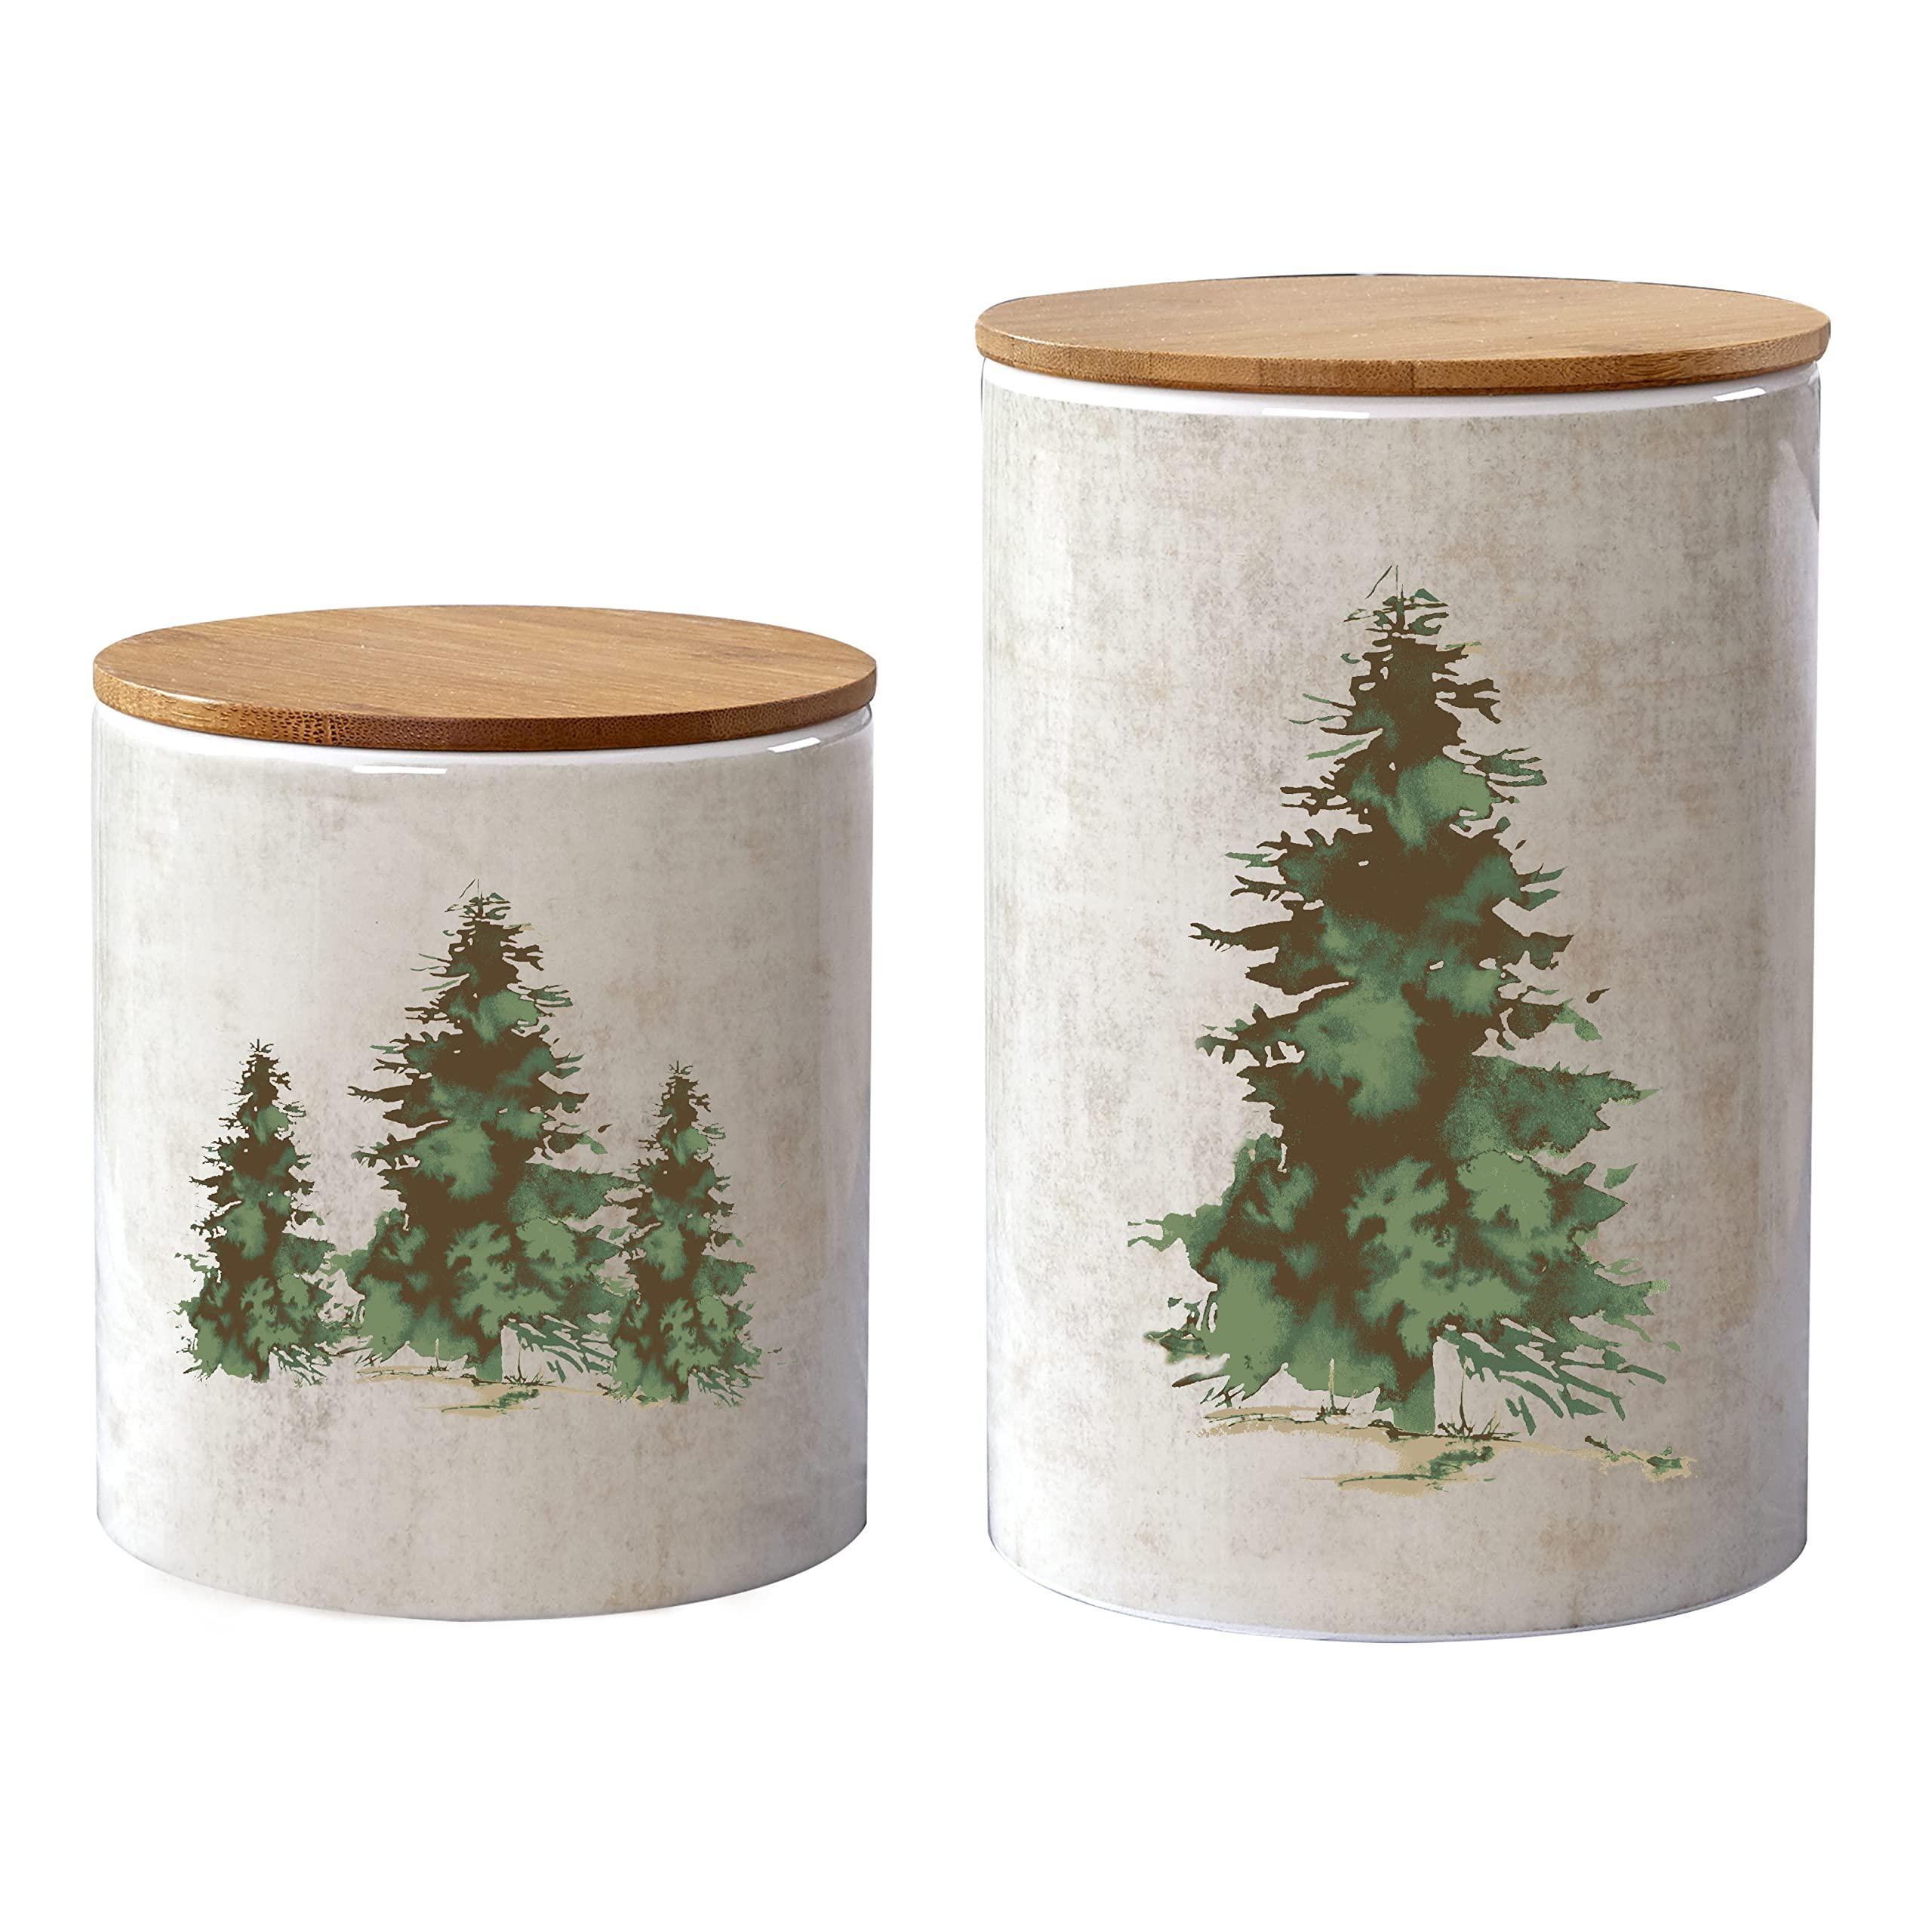 H HIEND ACCENTS paseo road by hiend accents | scenery tree canister sets for kitchen counter, set of 2 kitchen canisters for countertop, pine